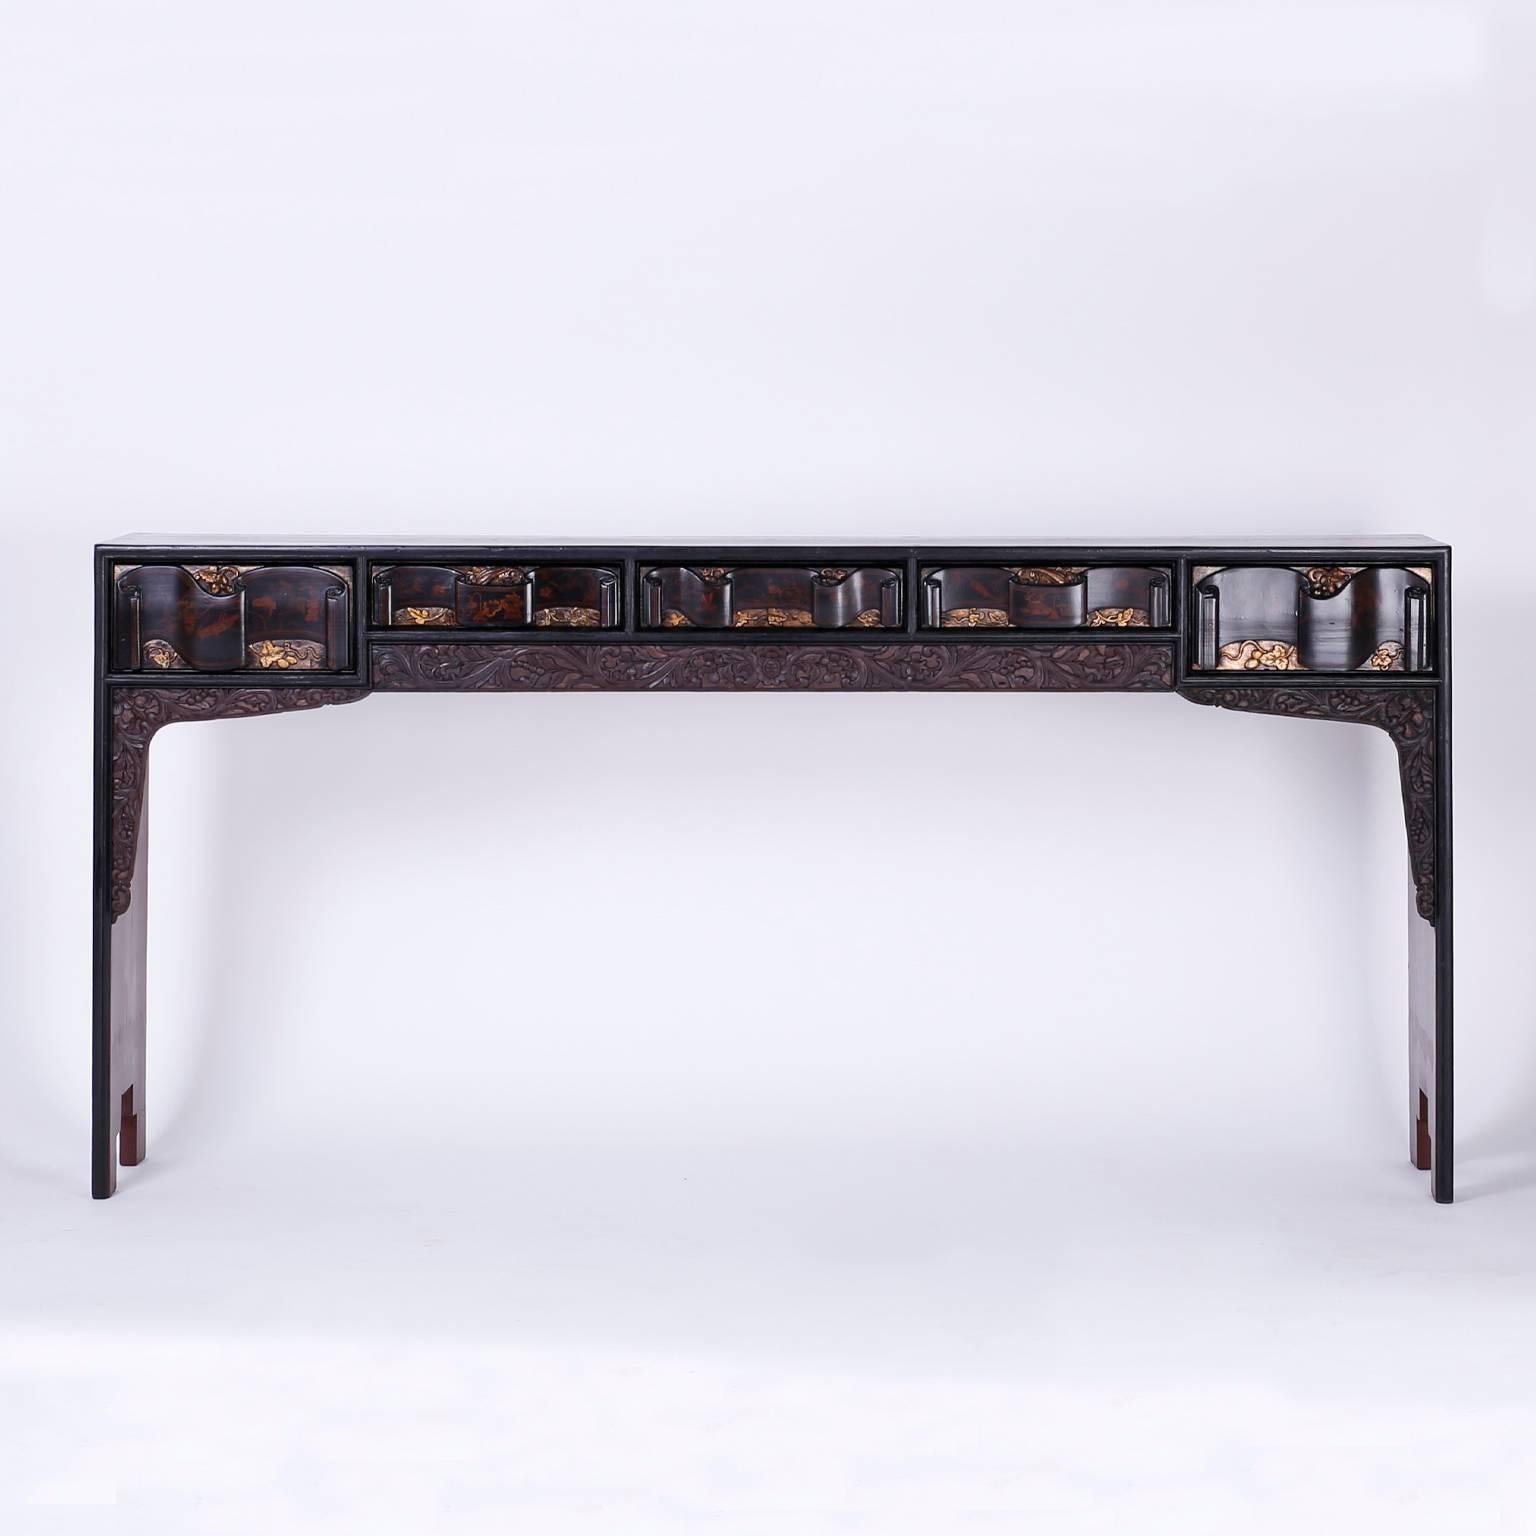 Inspired Chinese console with an unusual mixture of techniques and materials. Featuring five drawers with carved scroll fronts decorated with chinoiserie style paintings of grasshoppers and flowers above carved floral brackets. The top and sides